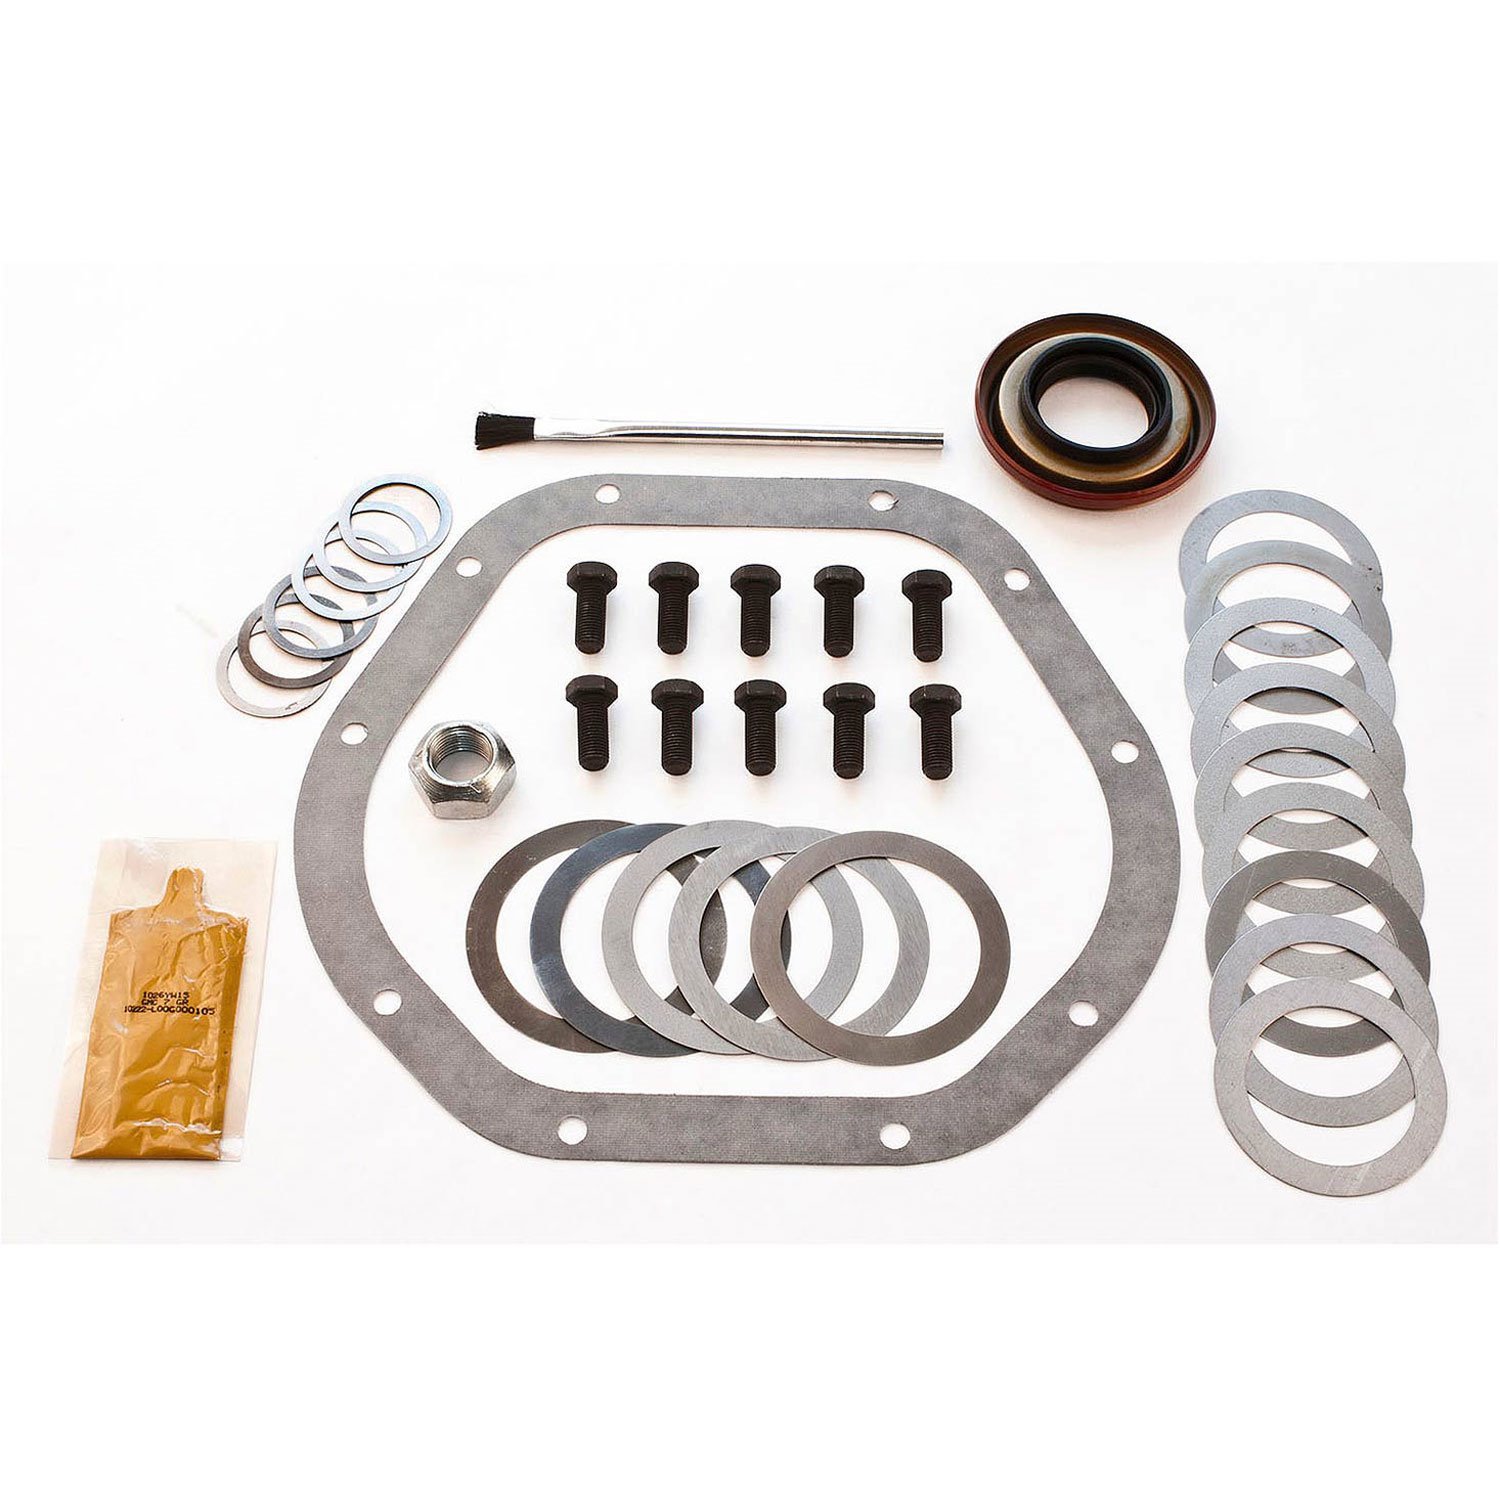 D44IK Ring and Pinion Installation Kit For Dana